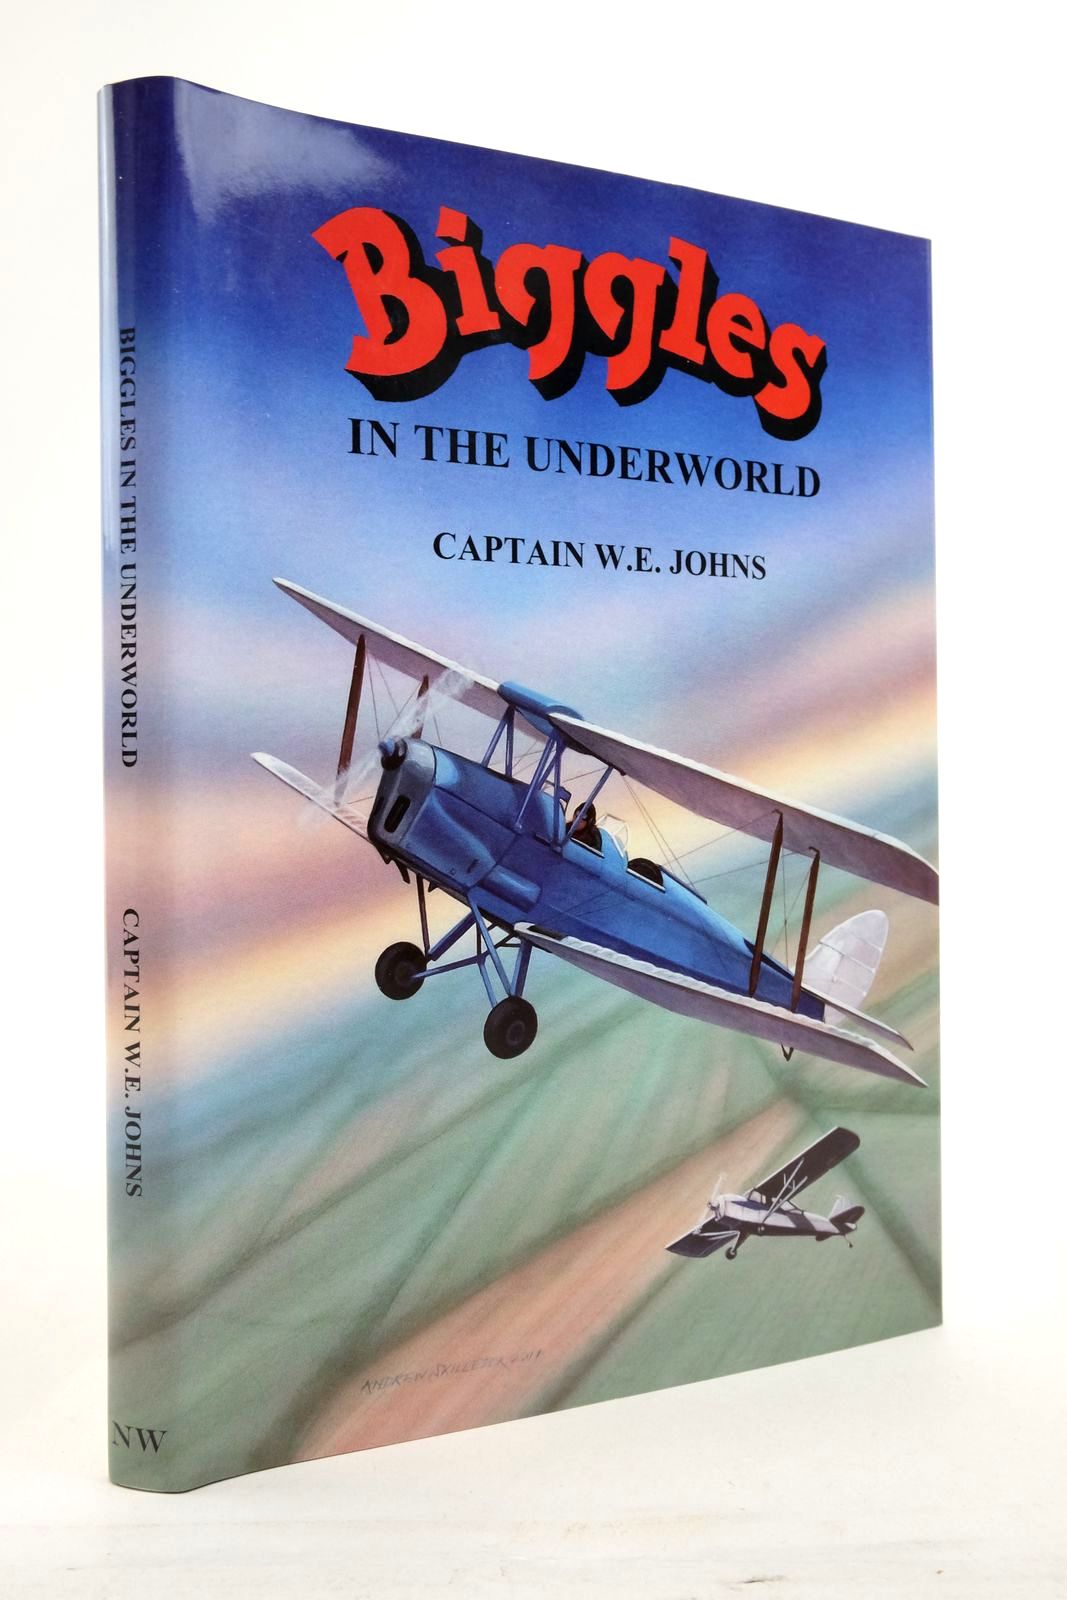 Photo of BIGGLES IN THE UNDERWORLD written by Johns, W.E. illustrated by Skilleter, Andrew published by Norman Wright (STOCK CODE: 2138307)  for sale by Stella & Rose's Books